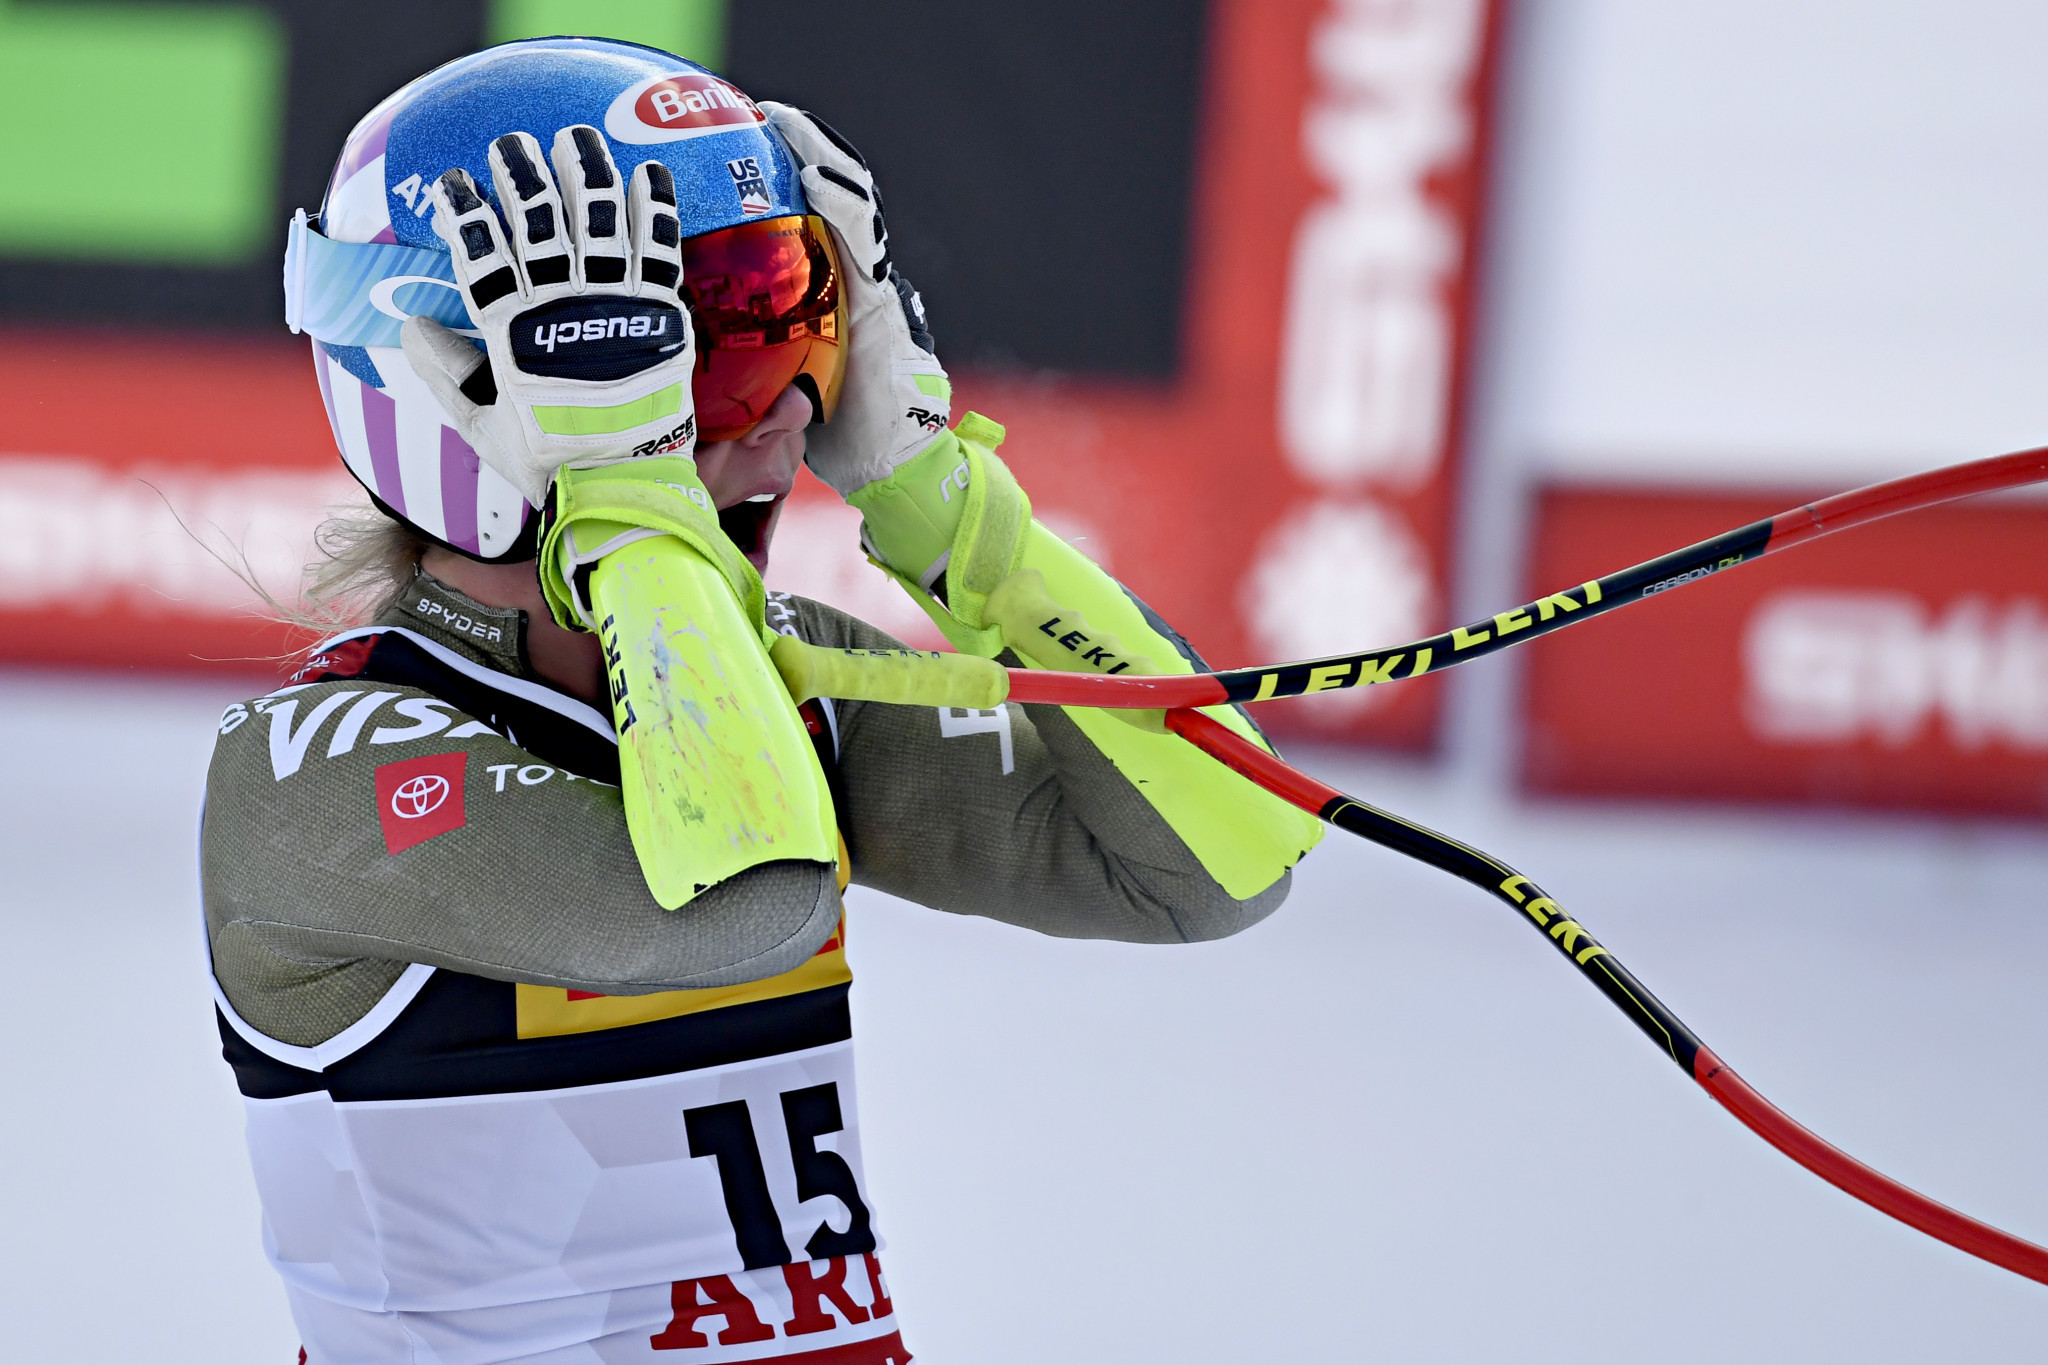 Mikaela Shiffrin, who is considered more of a slalom specialist, said the win was "crazy" ©Getty Images